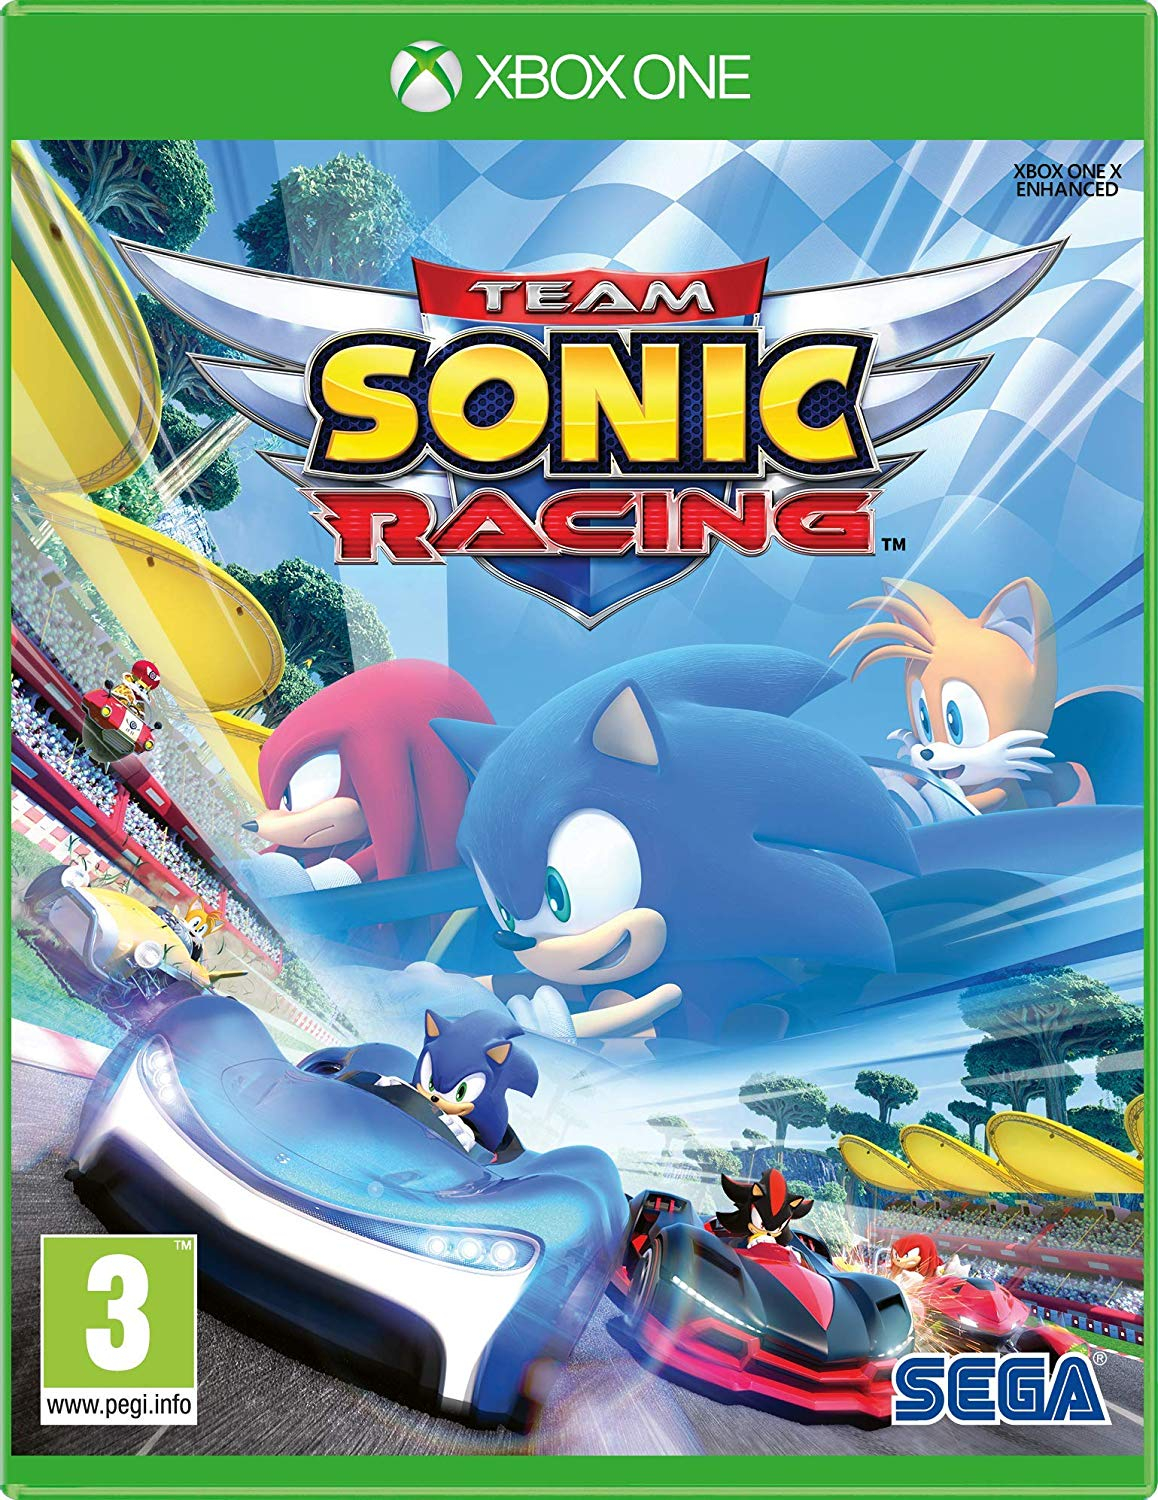 106Â° - Team Sonic Racing (Xbox One) for Â£15.03 delivered @ Amazon Sold by popitinthepost